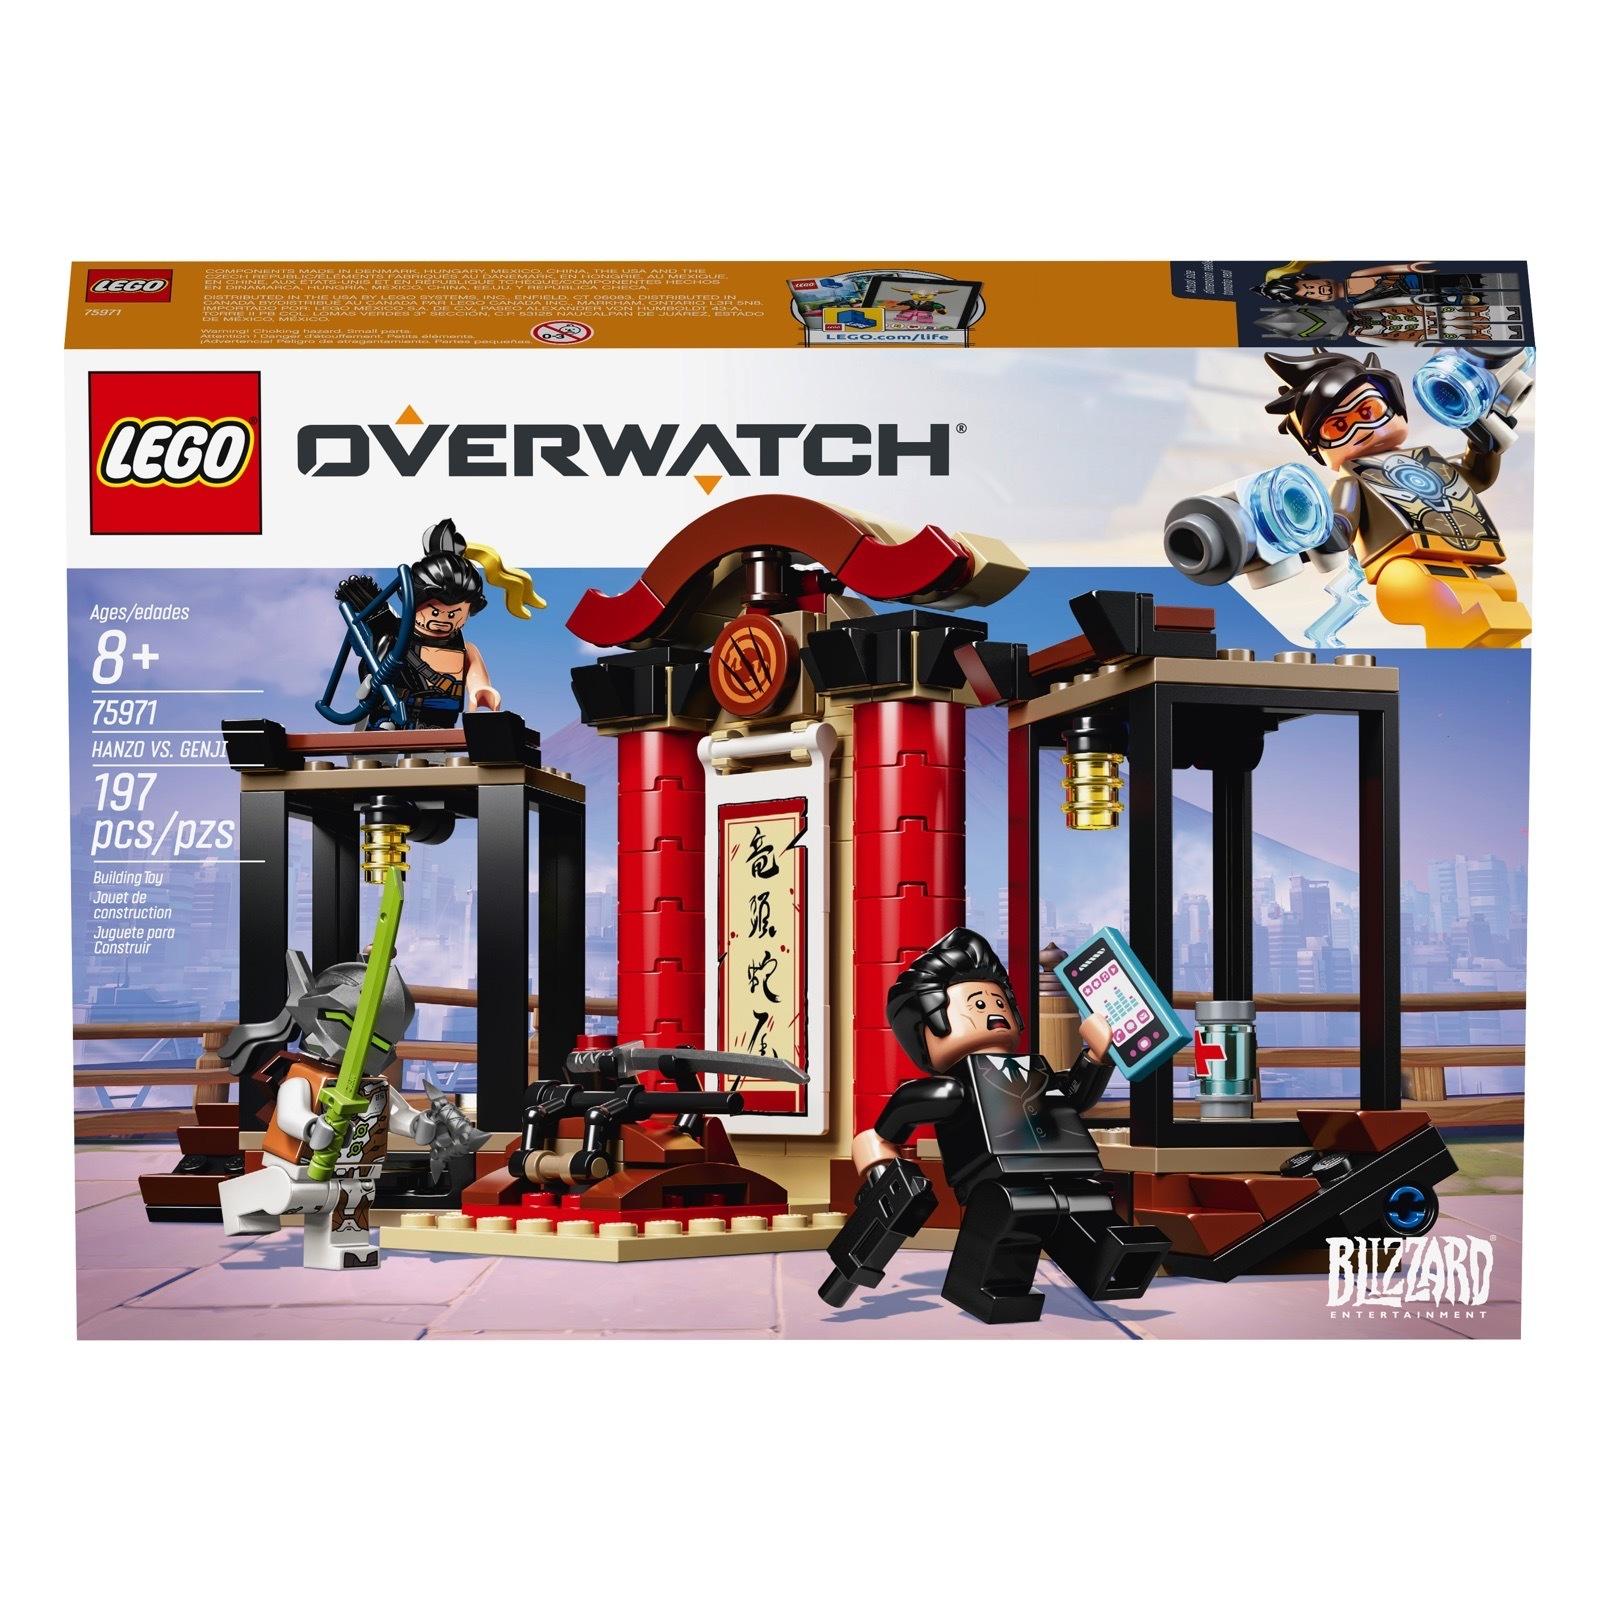 all lego overwatch sets